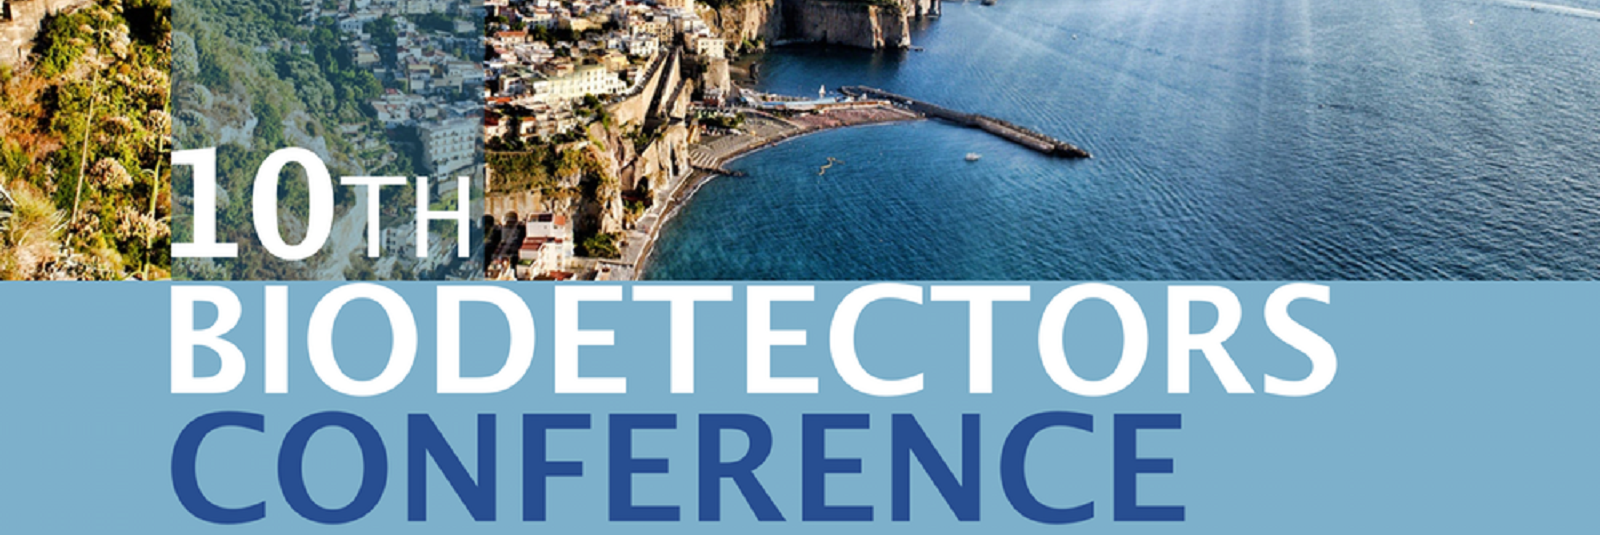 10TH BIODETECTORS CONFERENCE